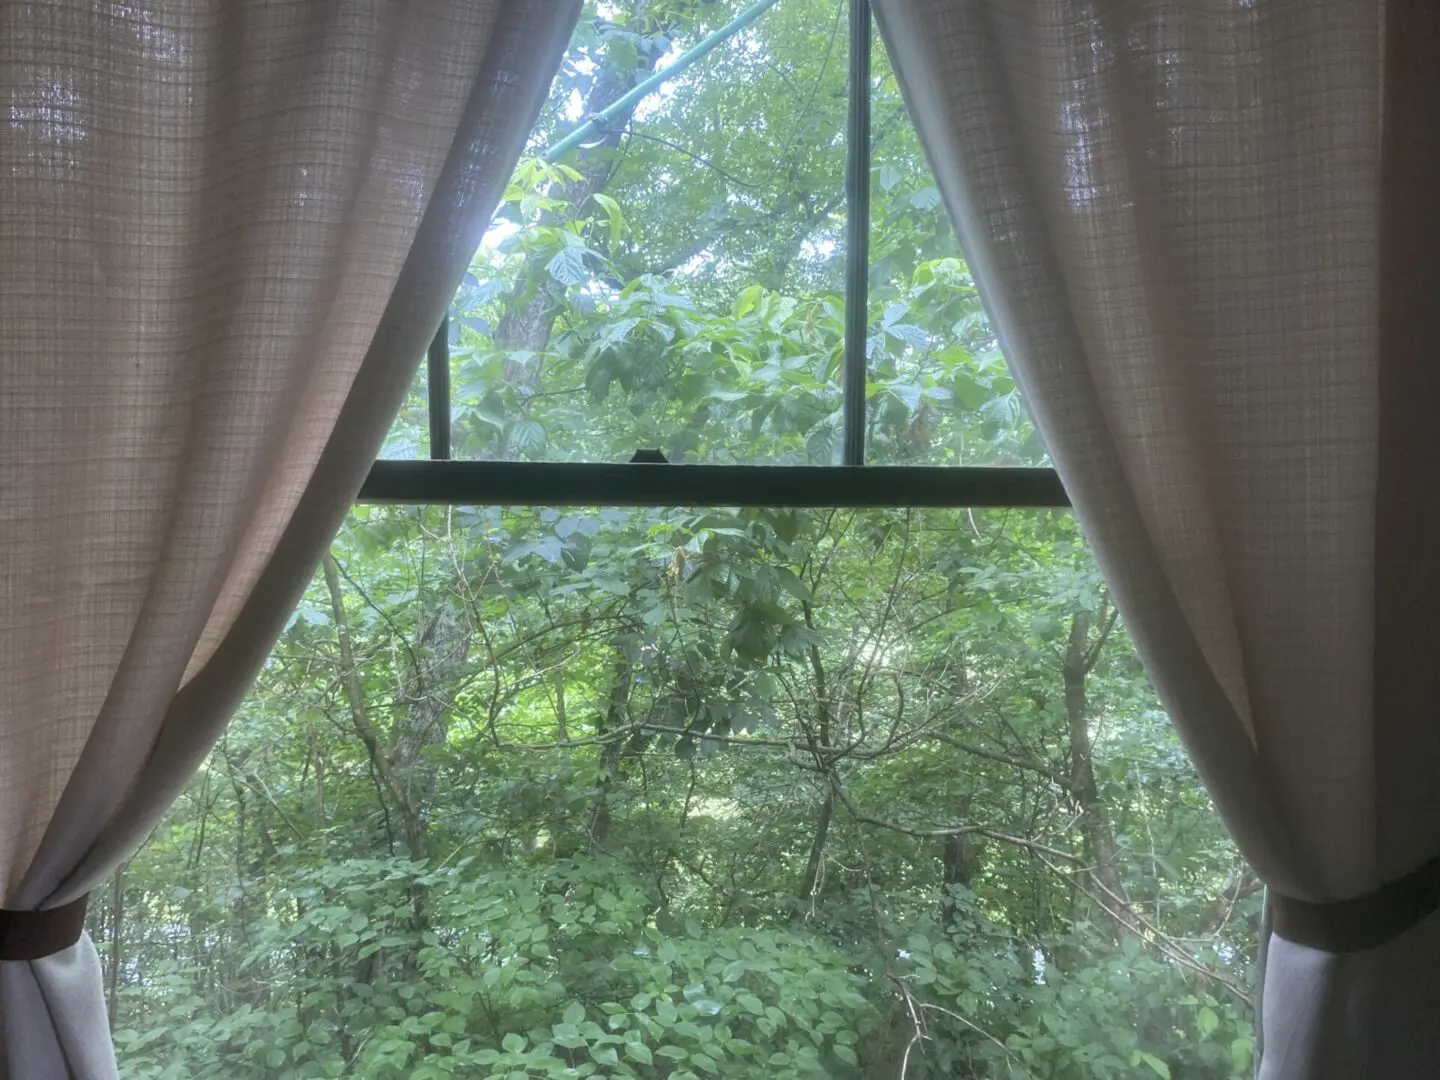 A window with curtains open and trees in the background